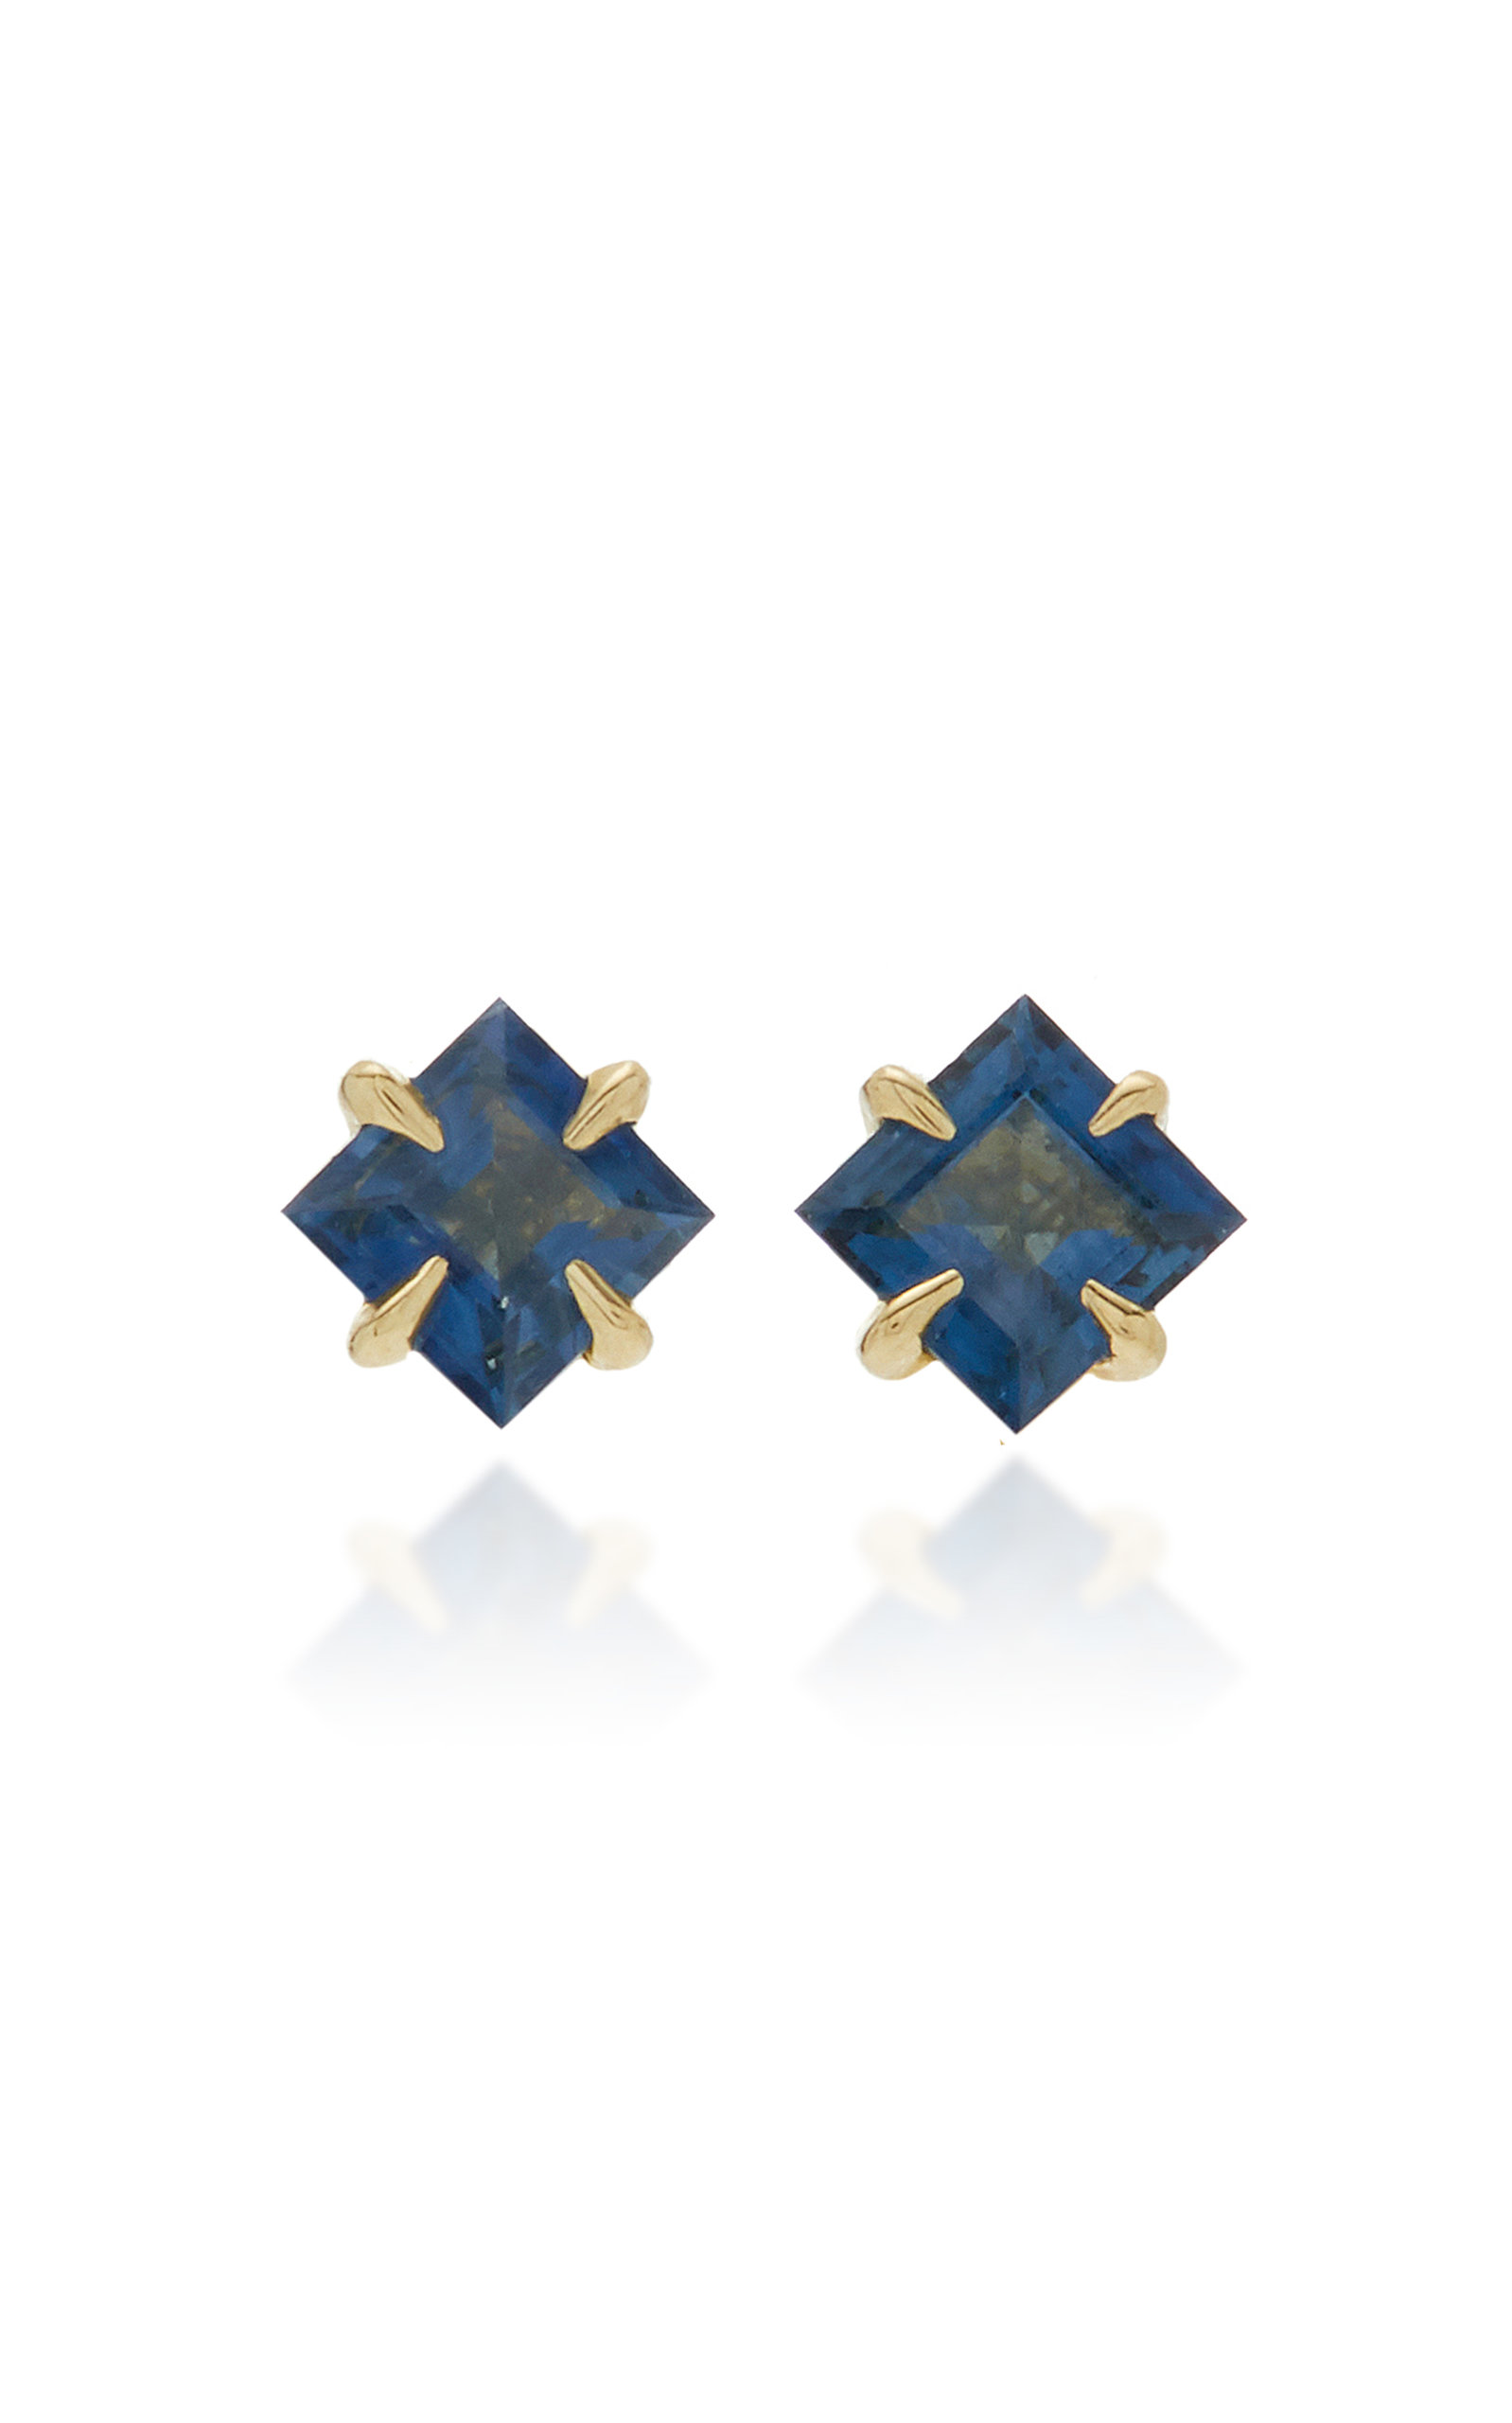 Primary Princess 14K Gold Blue Sapphire Earrings